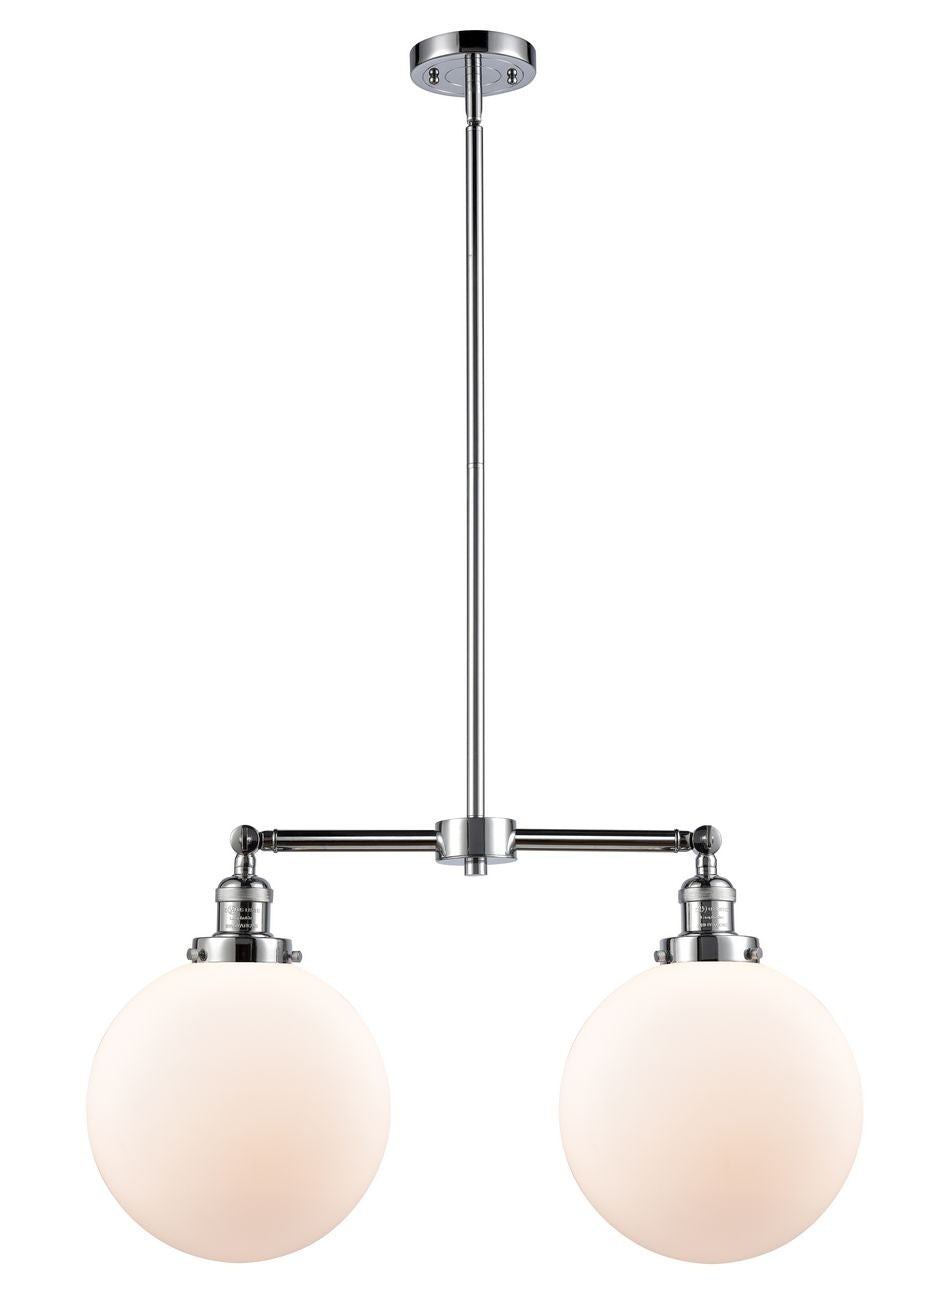 209-PC-G201-10 2-Light 25" Polished Chrome Island Light - Matte White Cased Beacon Glass - LED Bulb - Dimmensions: 25 x 10 x 14<br>Minimum Height : 24.875<br>Maximum Height : 48.875 - Sloped Ceiling Compatible: Yes